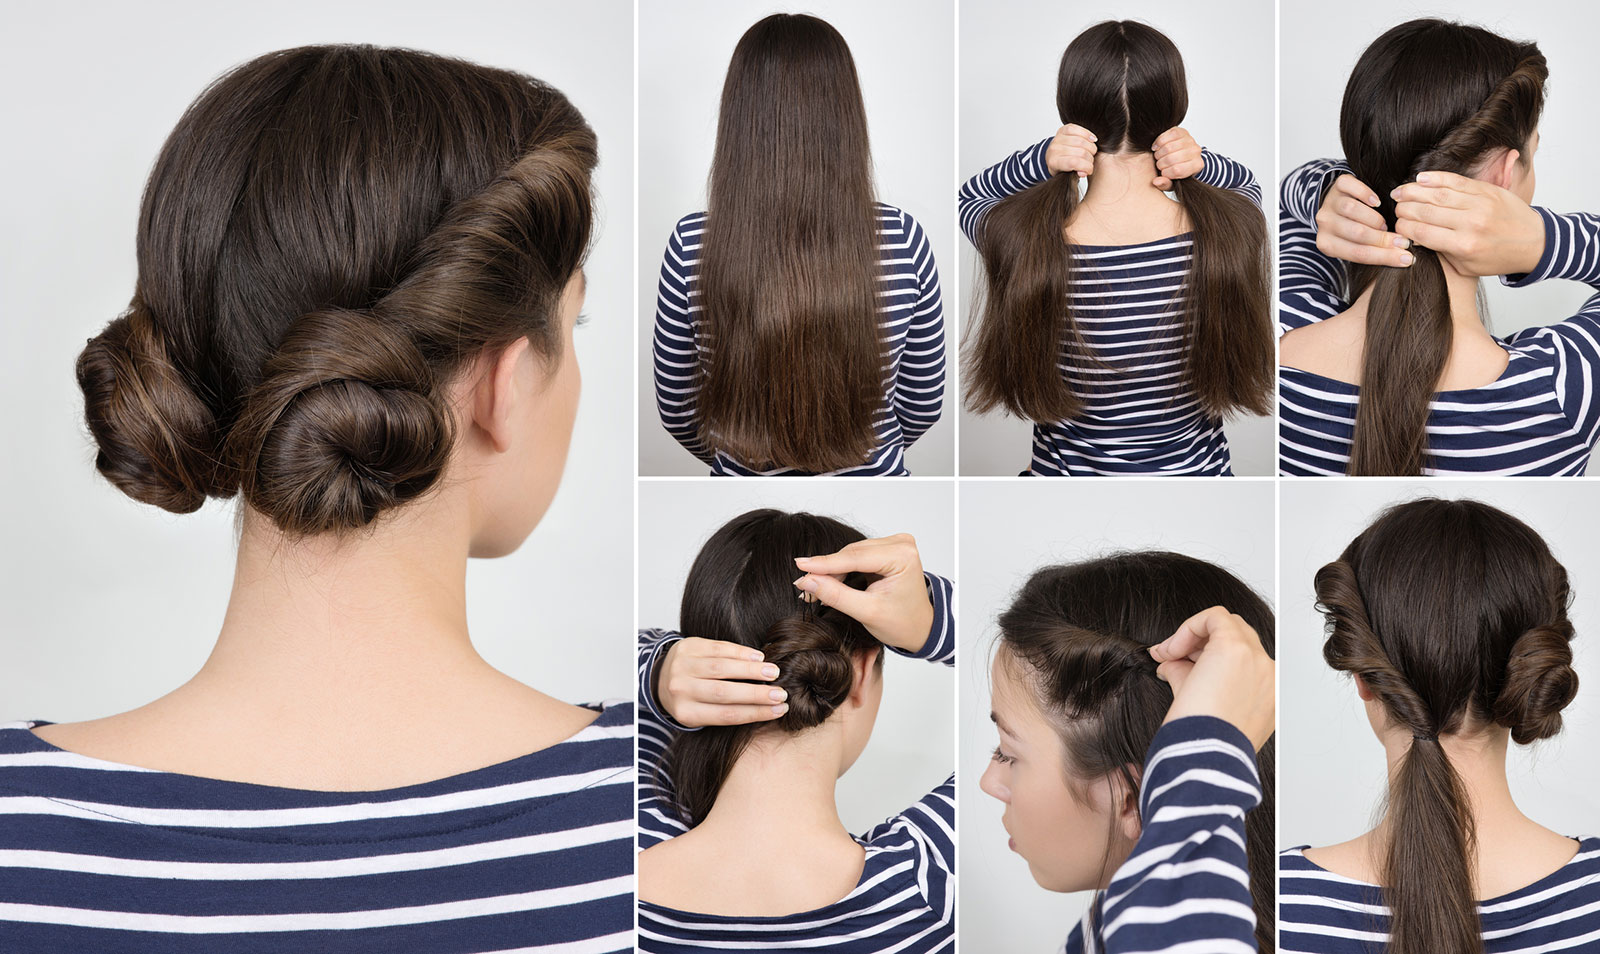 Twisted double buns easy hair updo